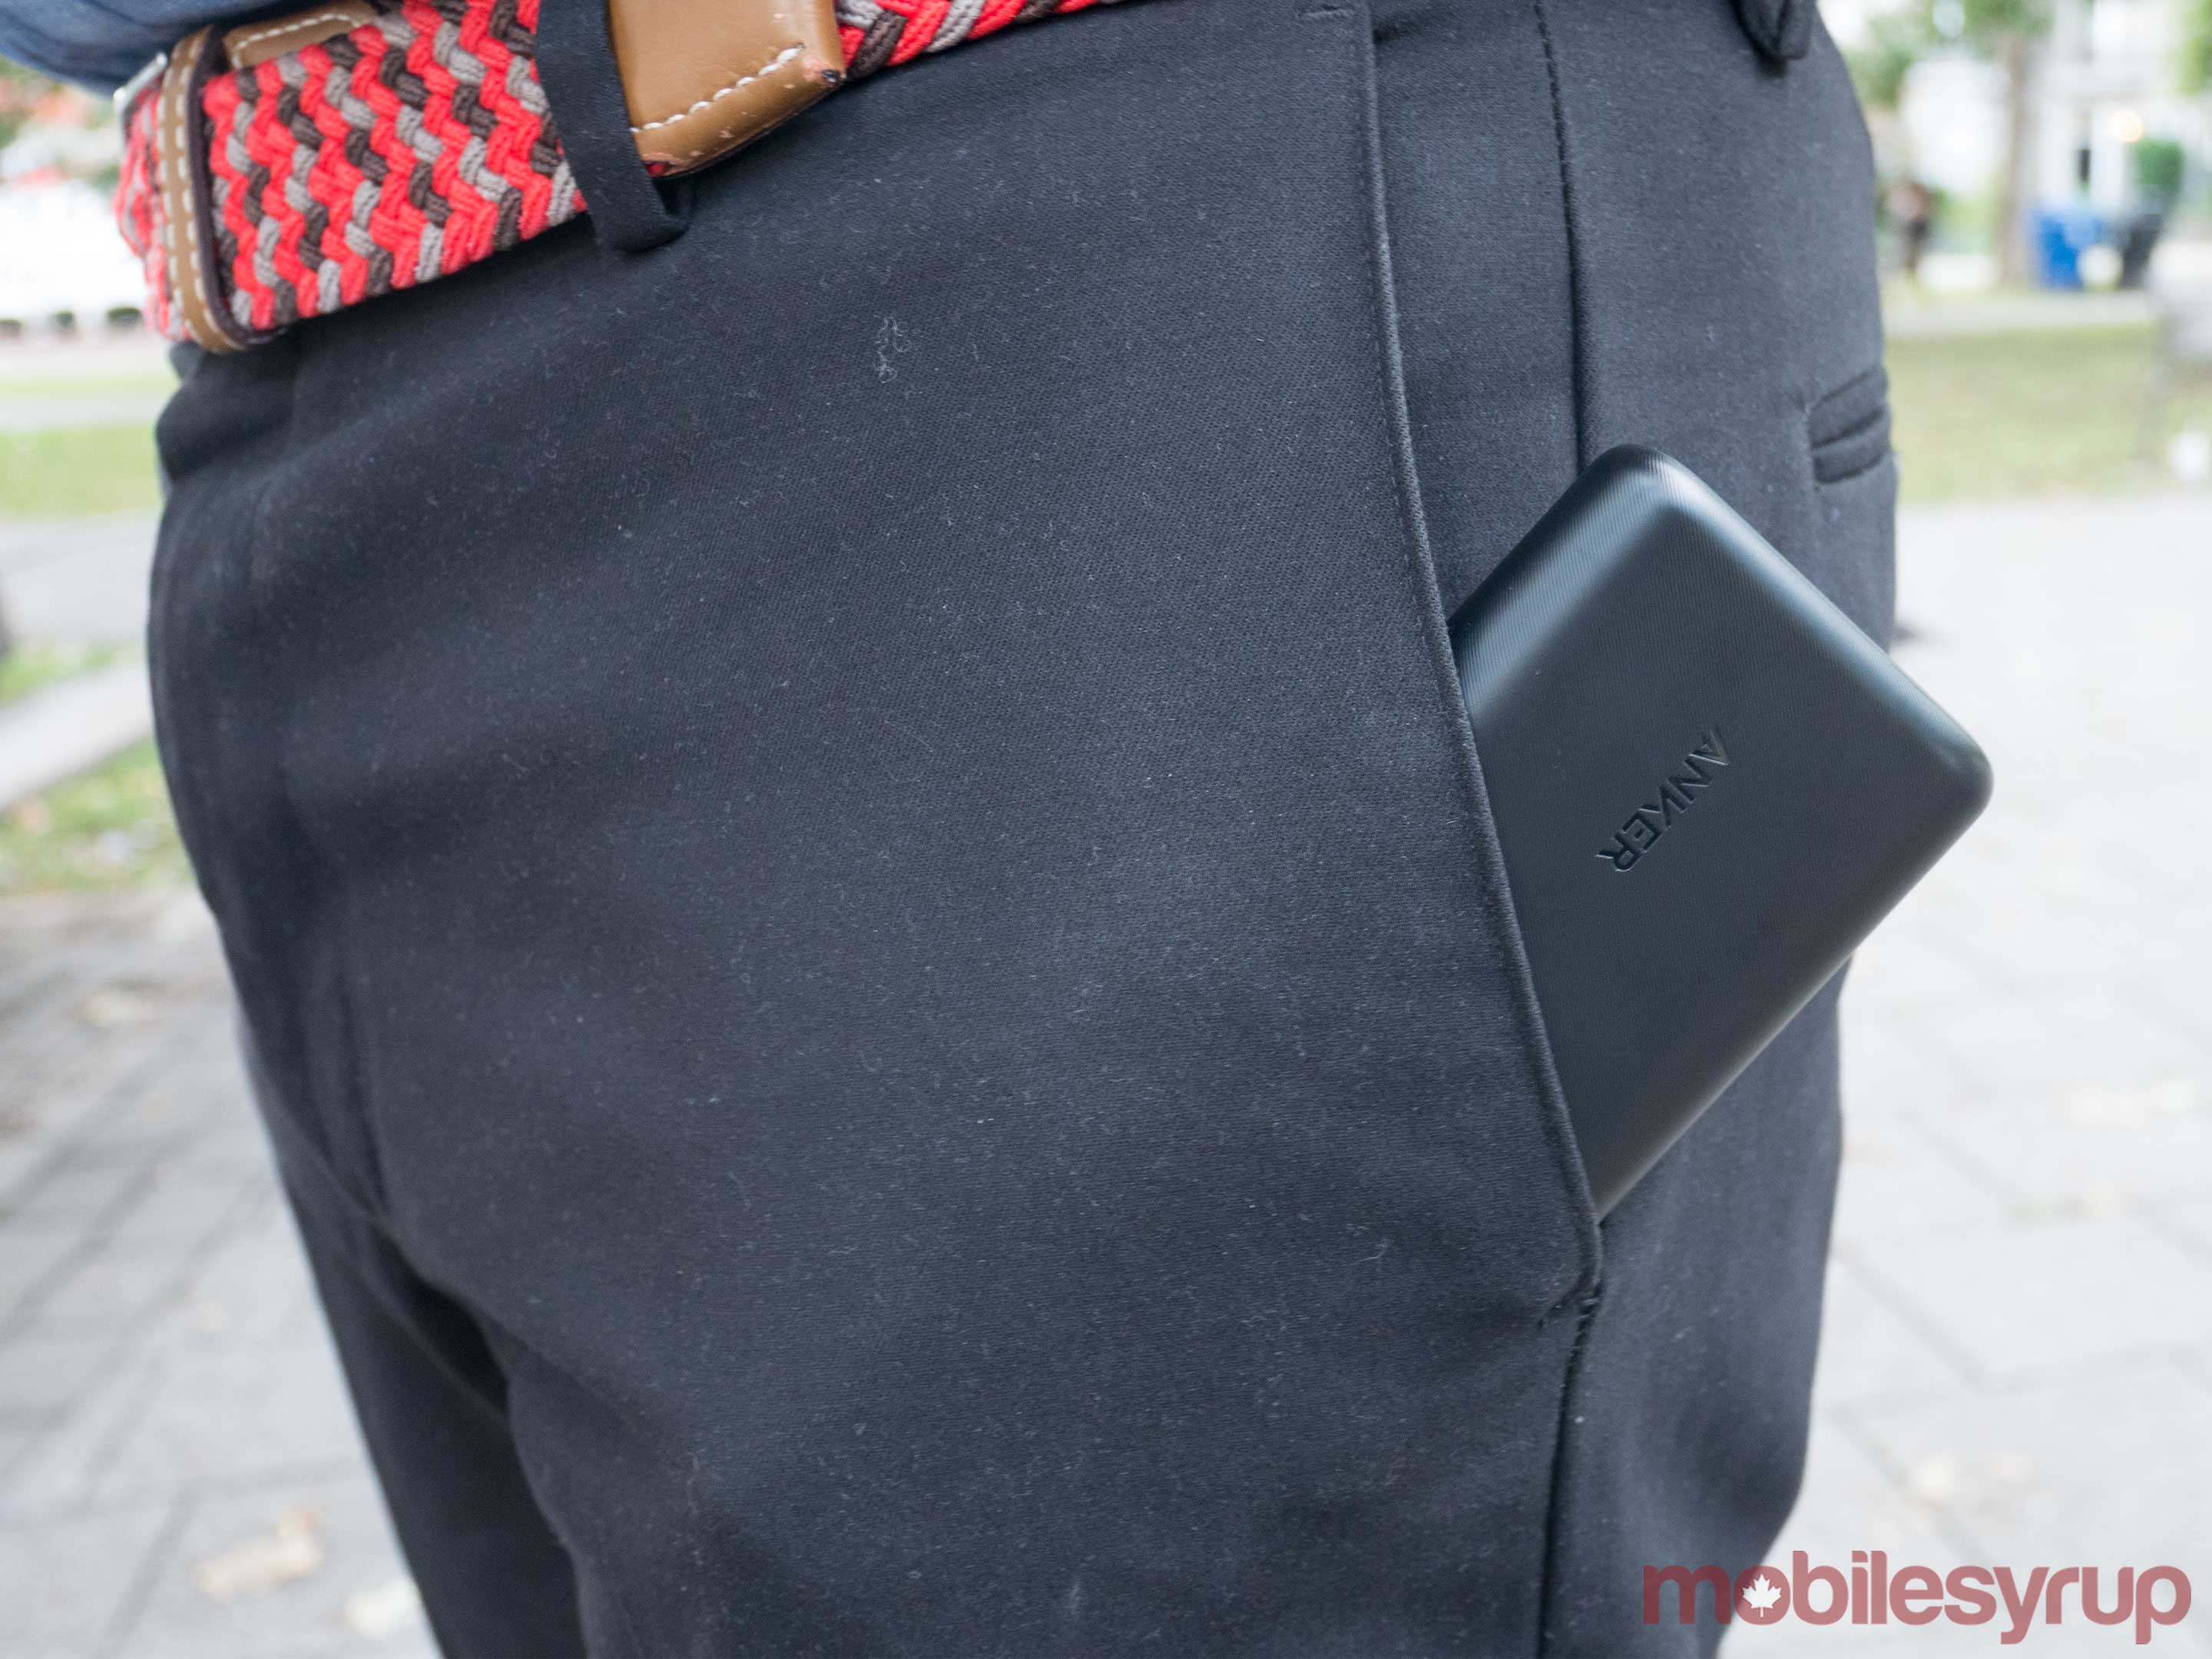 The Anker PowerCore in a pocket